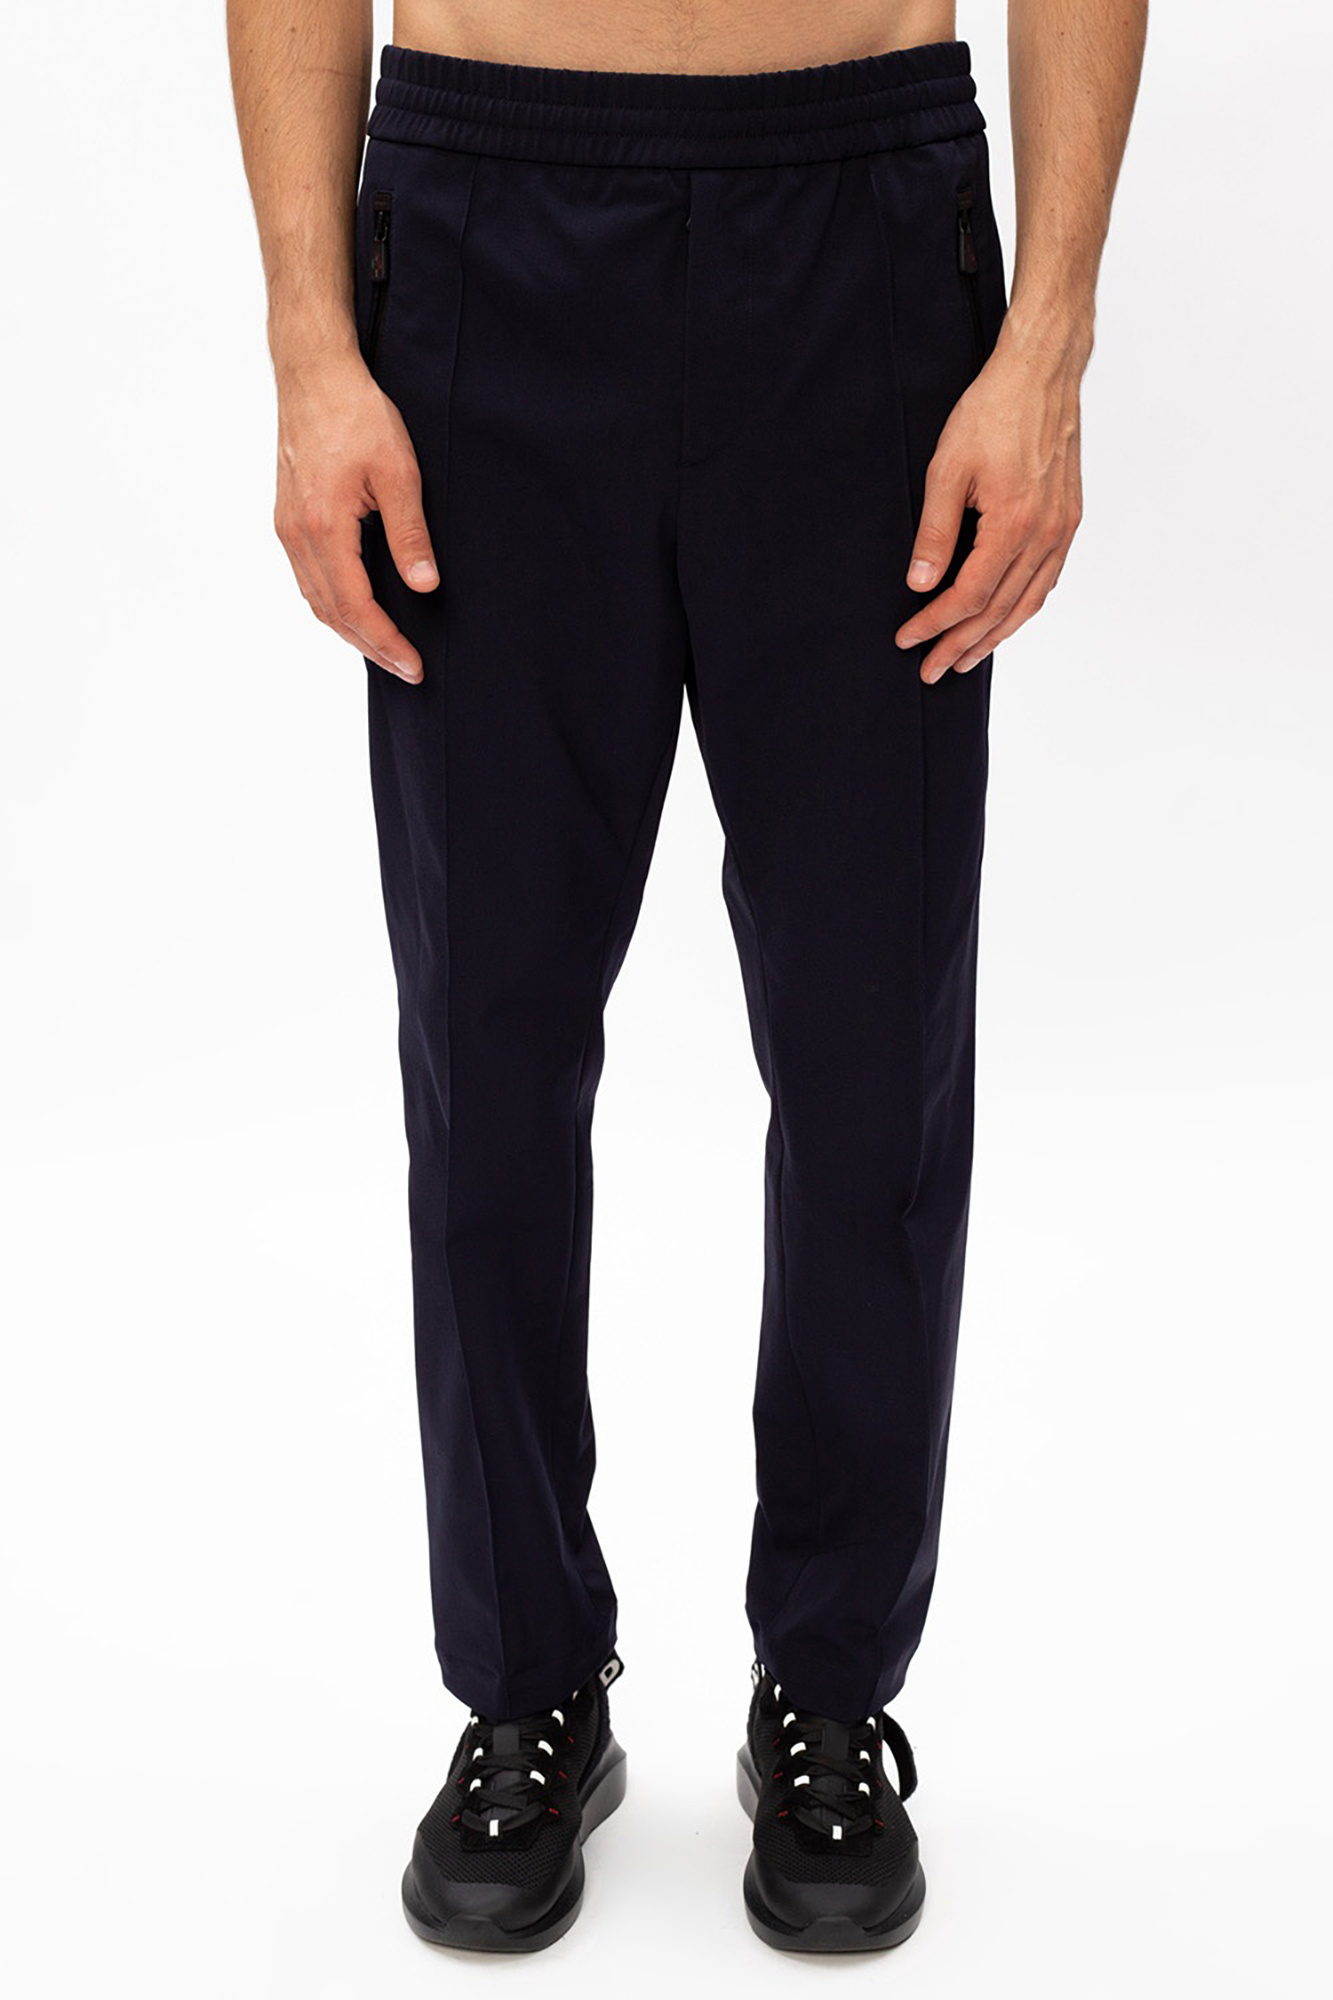 Moncler Grenoble Trousers with logo